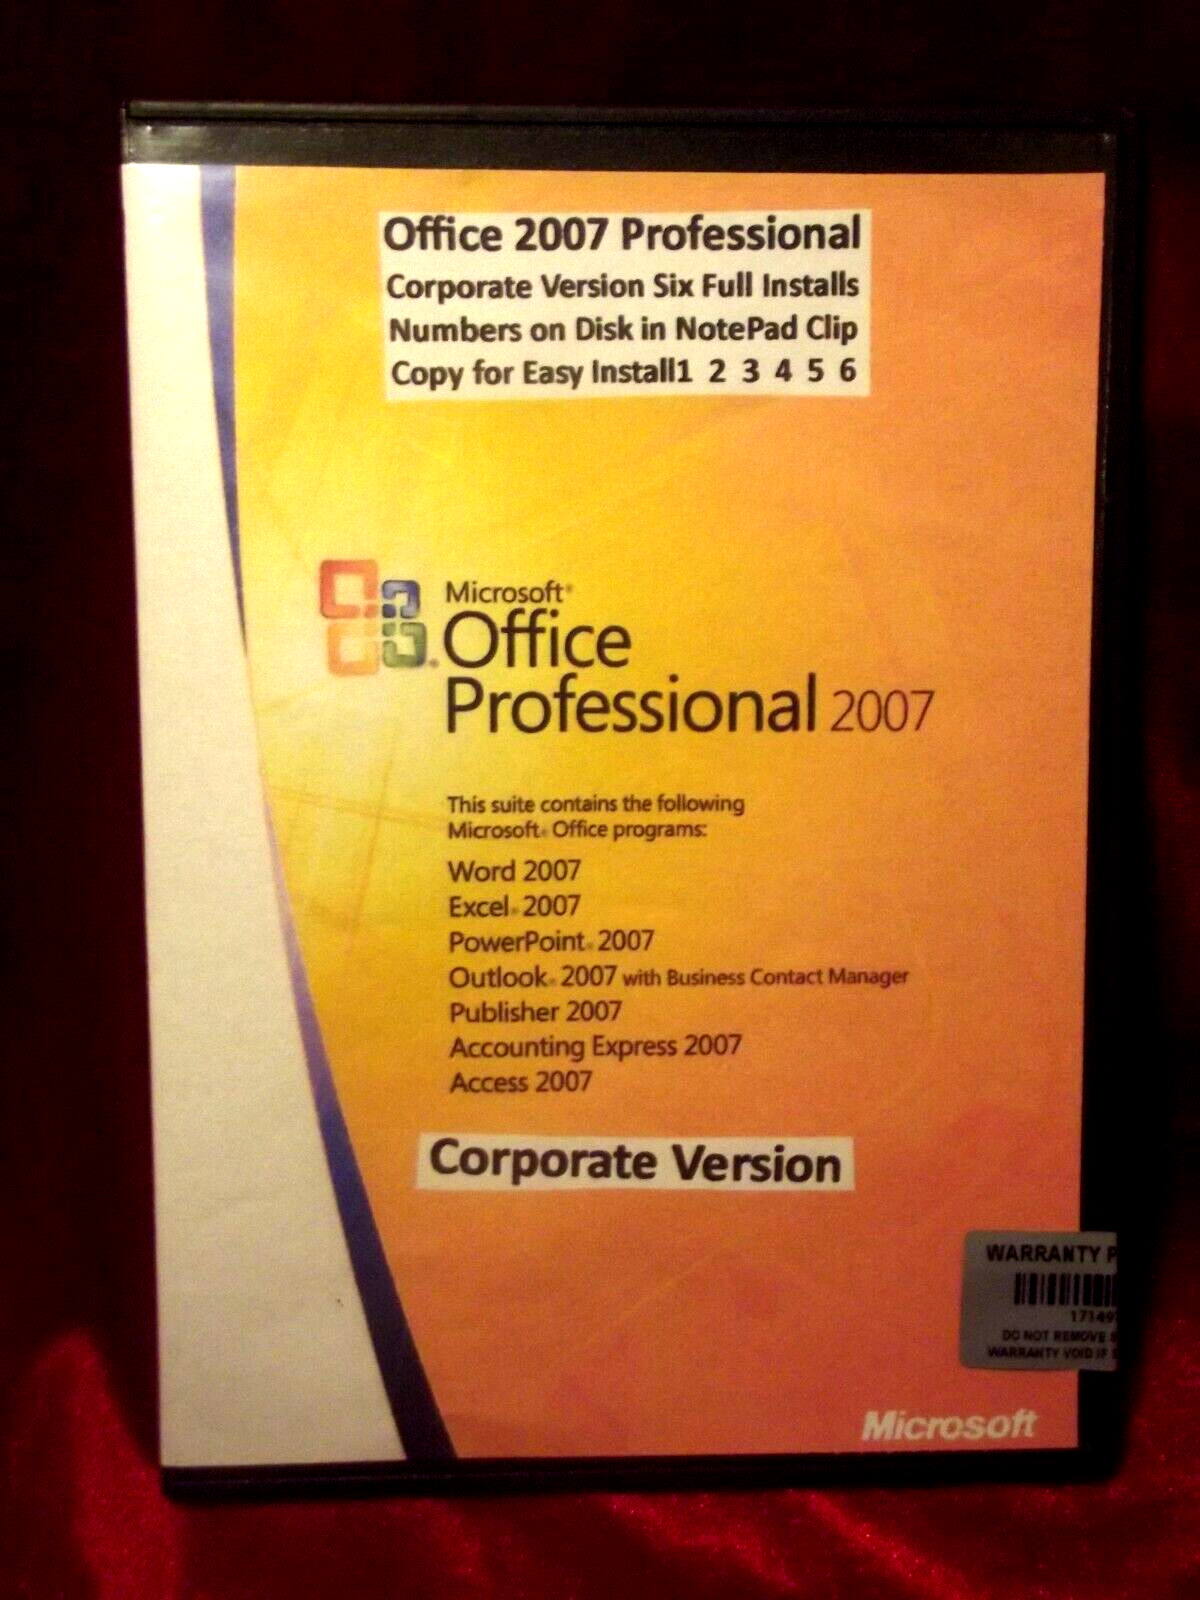 Microsoft Office 2007 Professional Licensed for SIX (6) Multiple PCs or Laptops